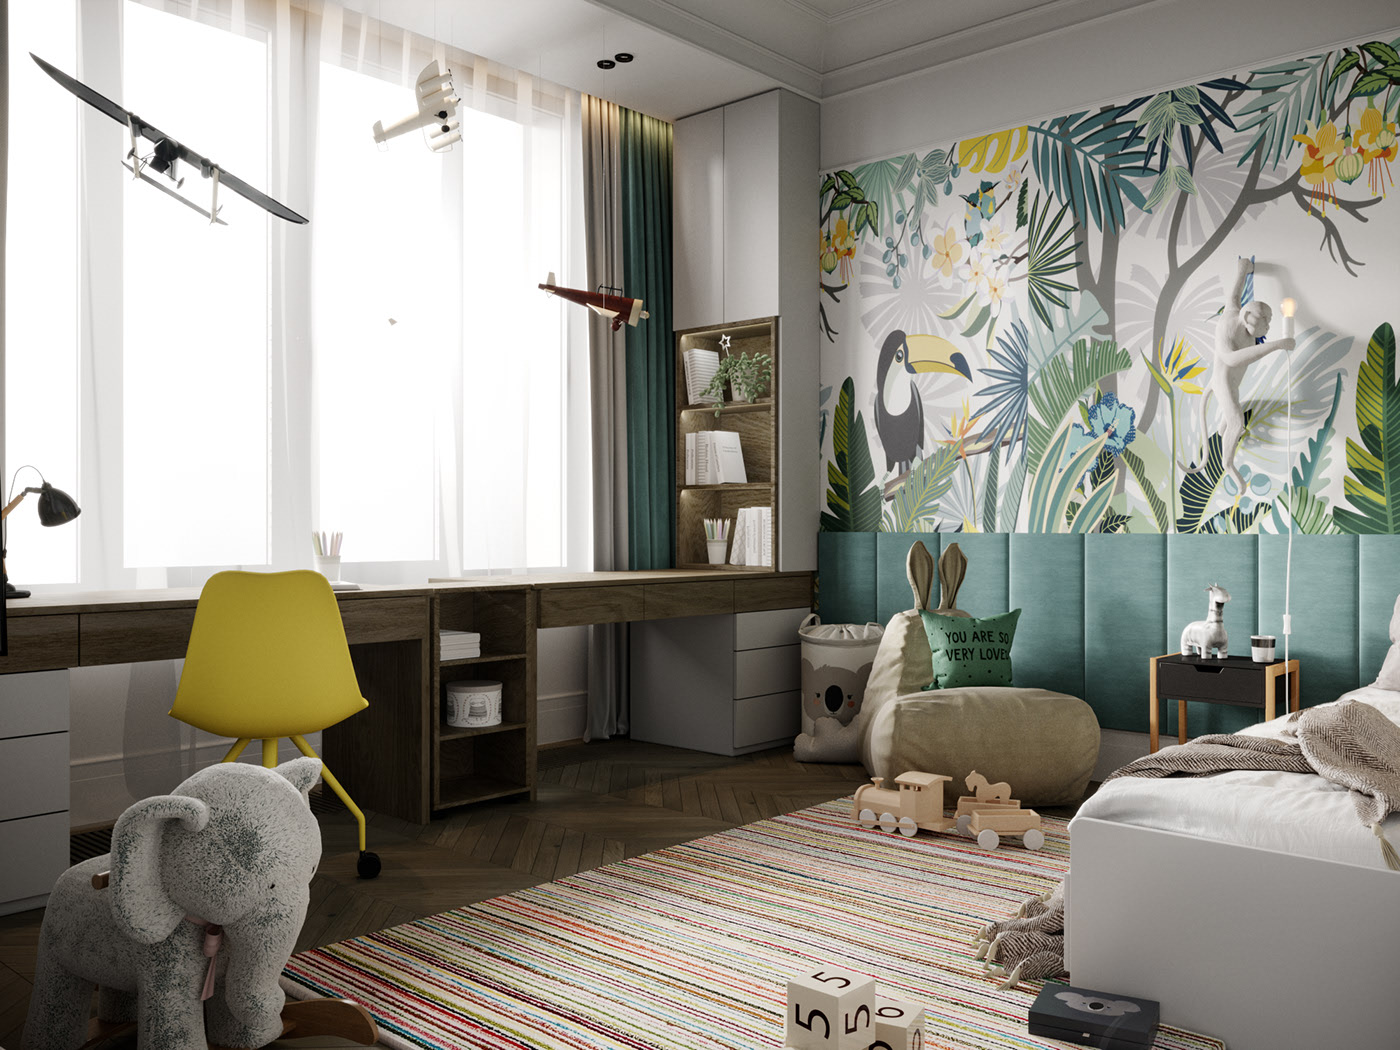 Bright colors are used in the children's bedroom, along with new, vibrant, and appealing decorative details. The interior is made of industrial wood to ensure durability and consistency.